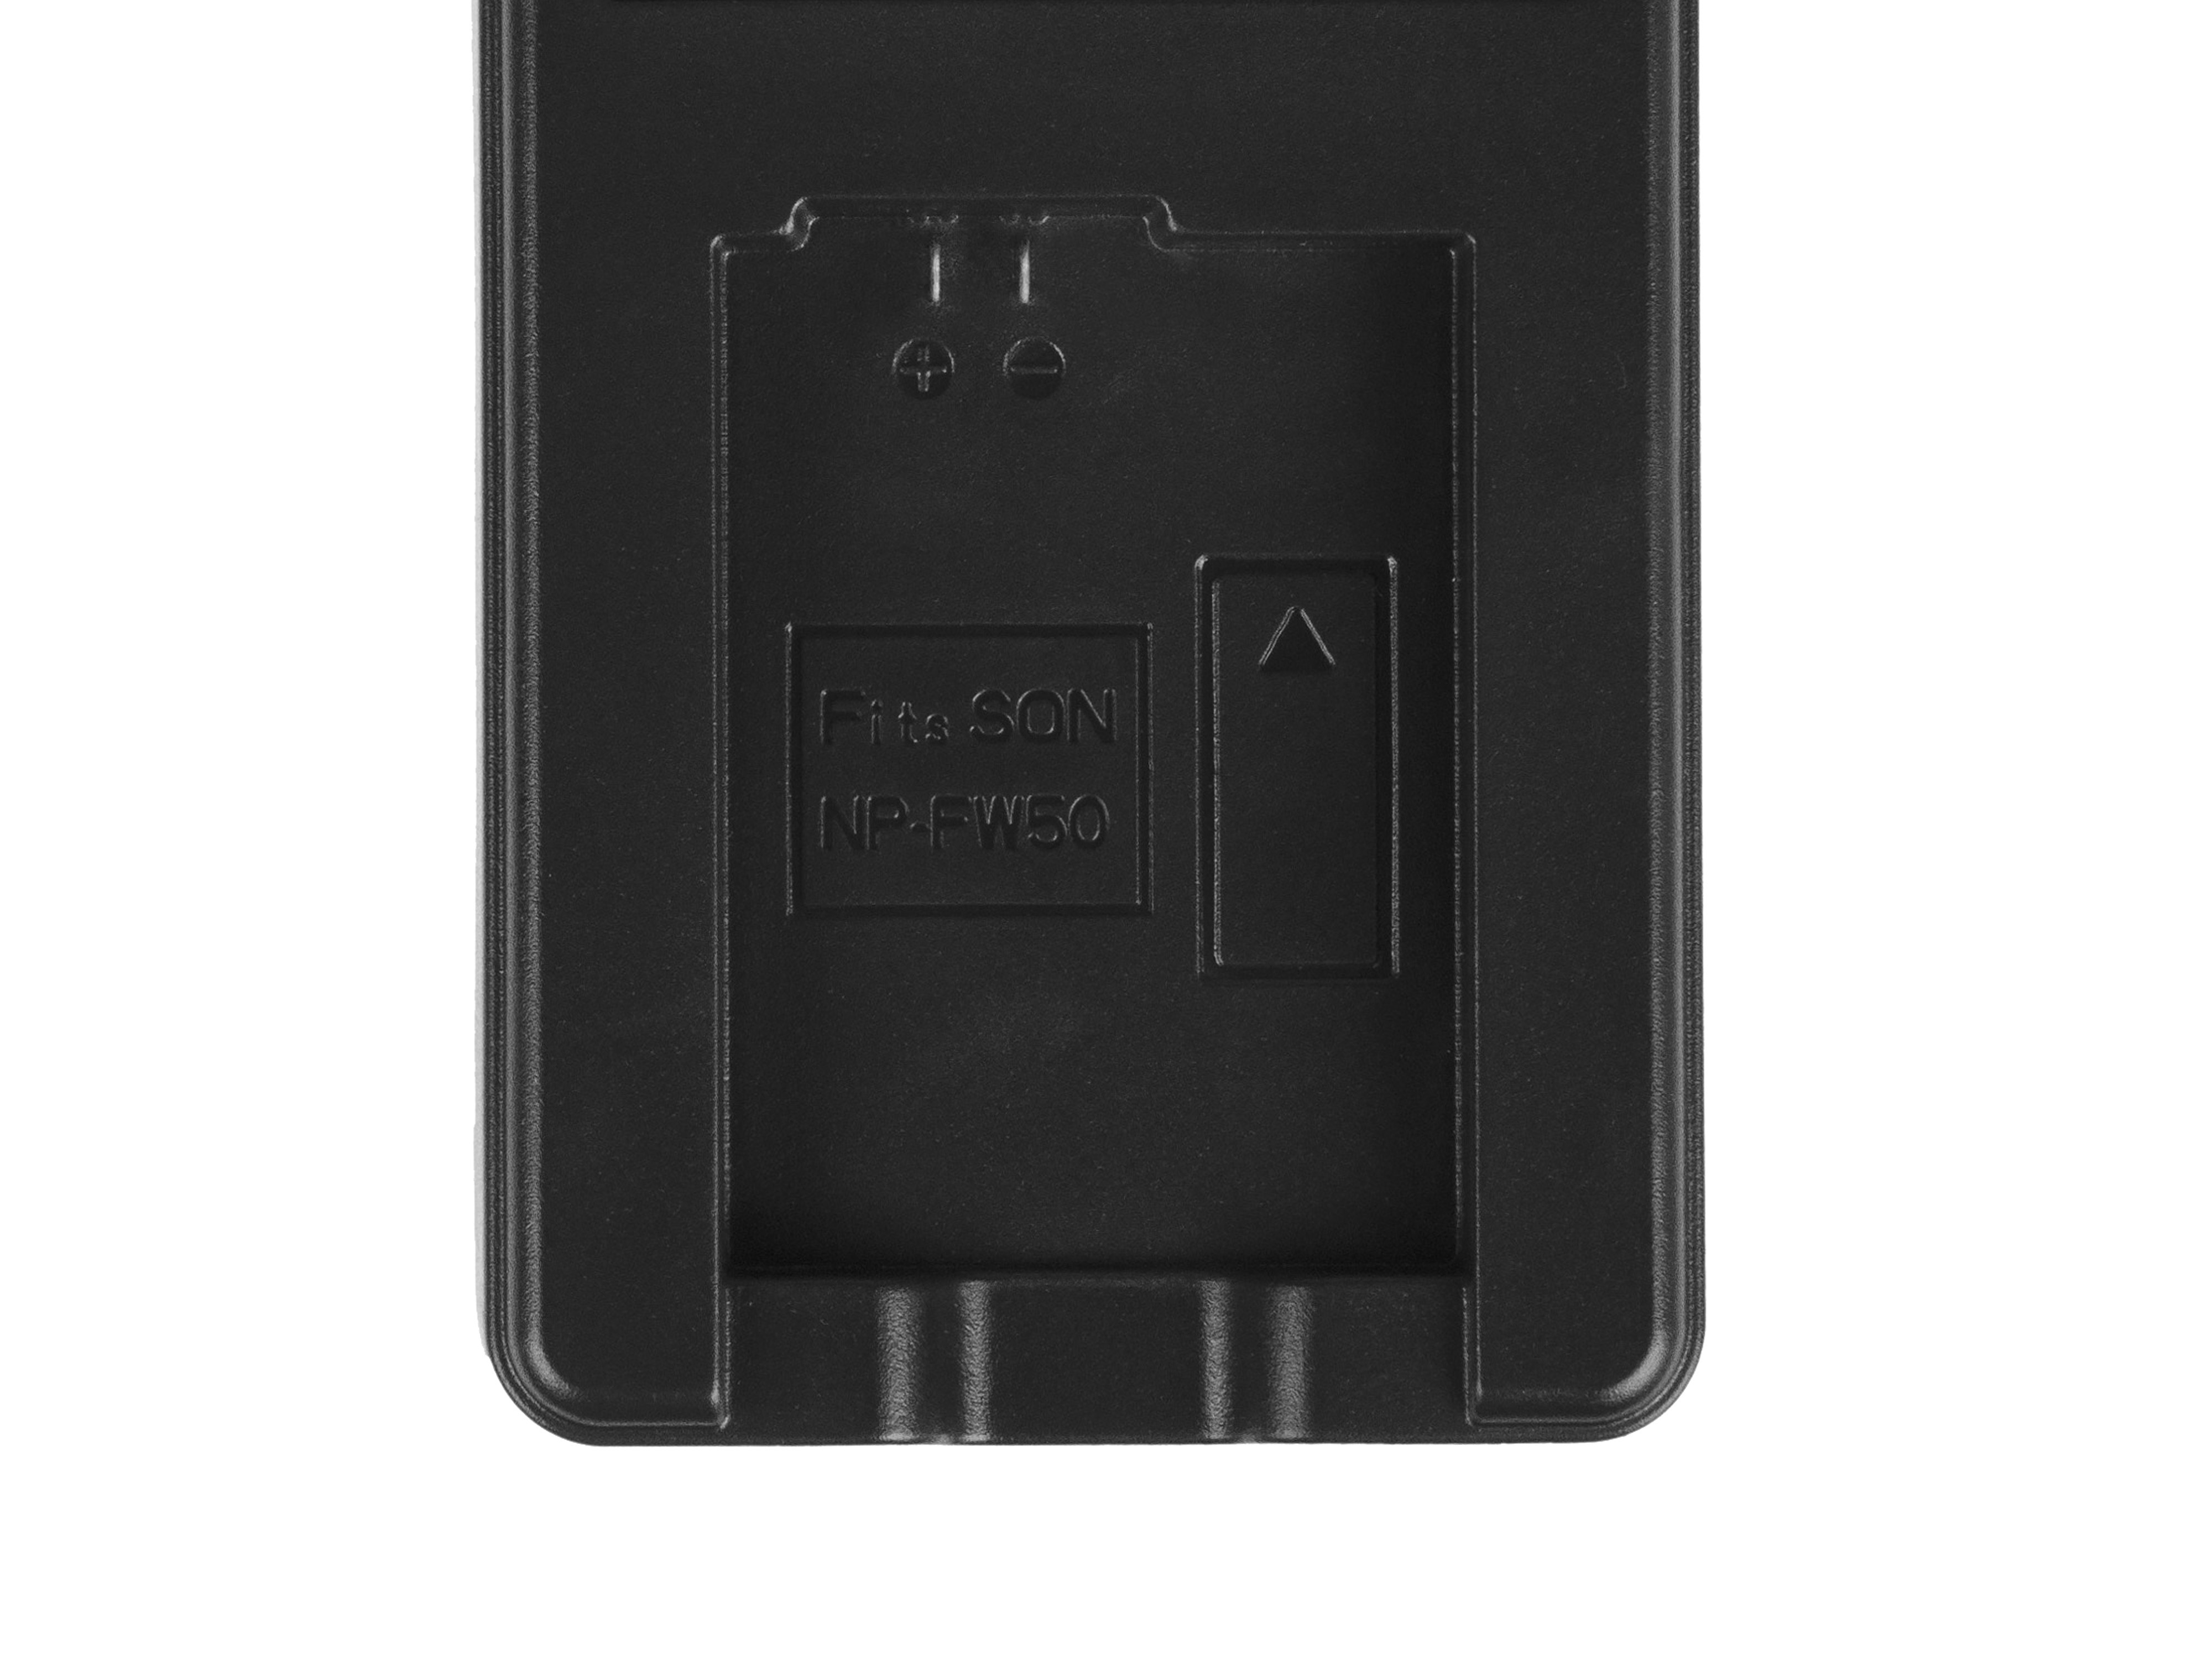 Green Cell Charger BC-TRW for Sony NP-FW50, RX10 III A7 II A7R II A7S II A3000 A5000 A6000 A6500 (8.4V 5W 0.6A)